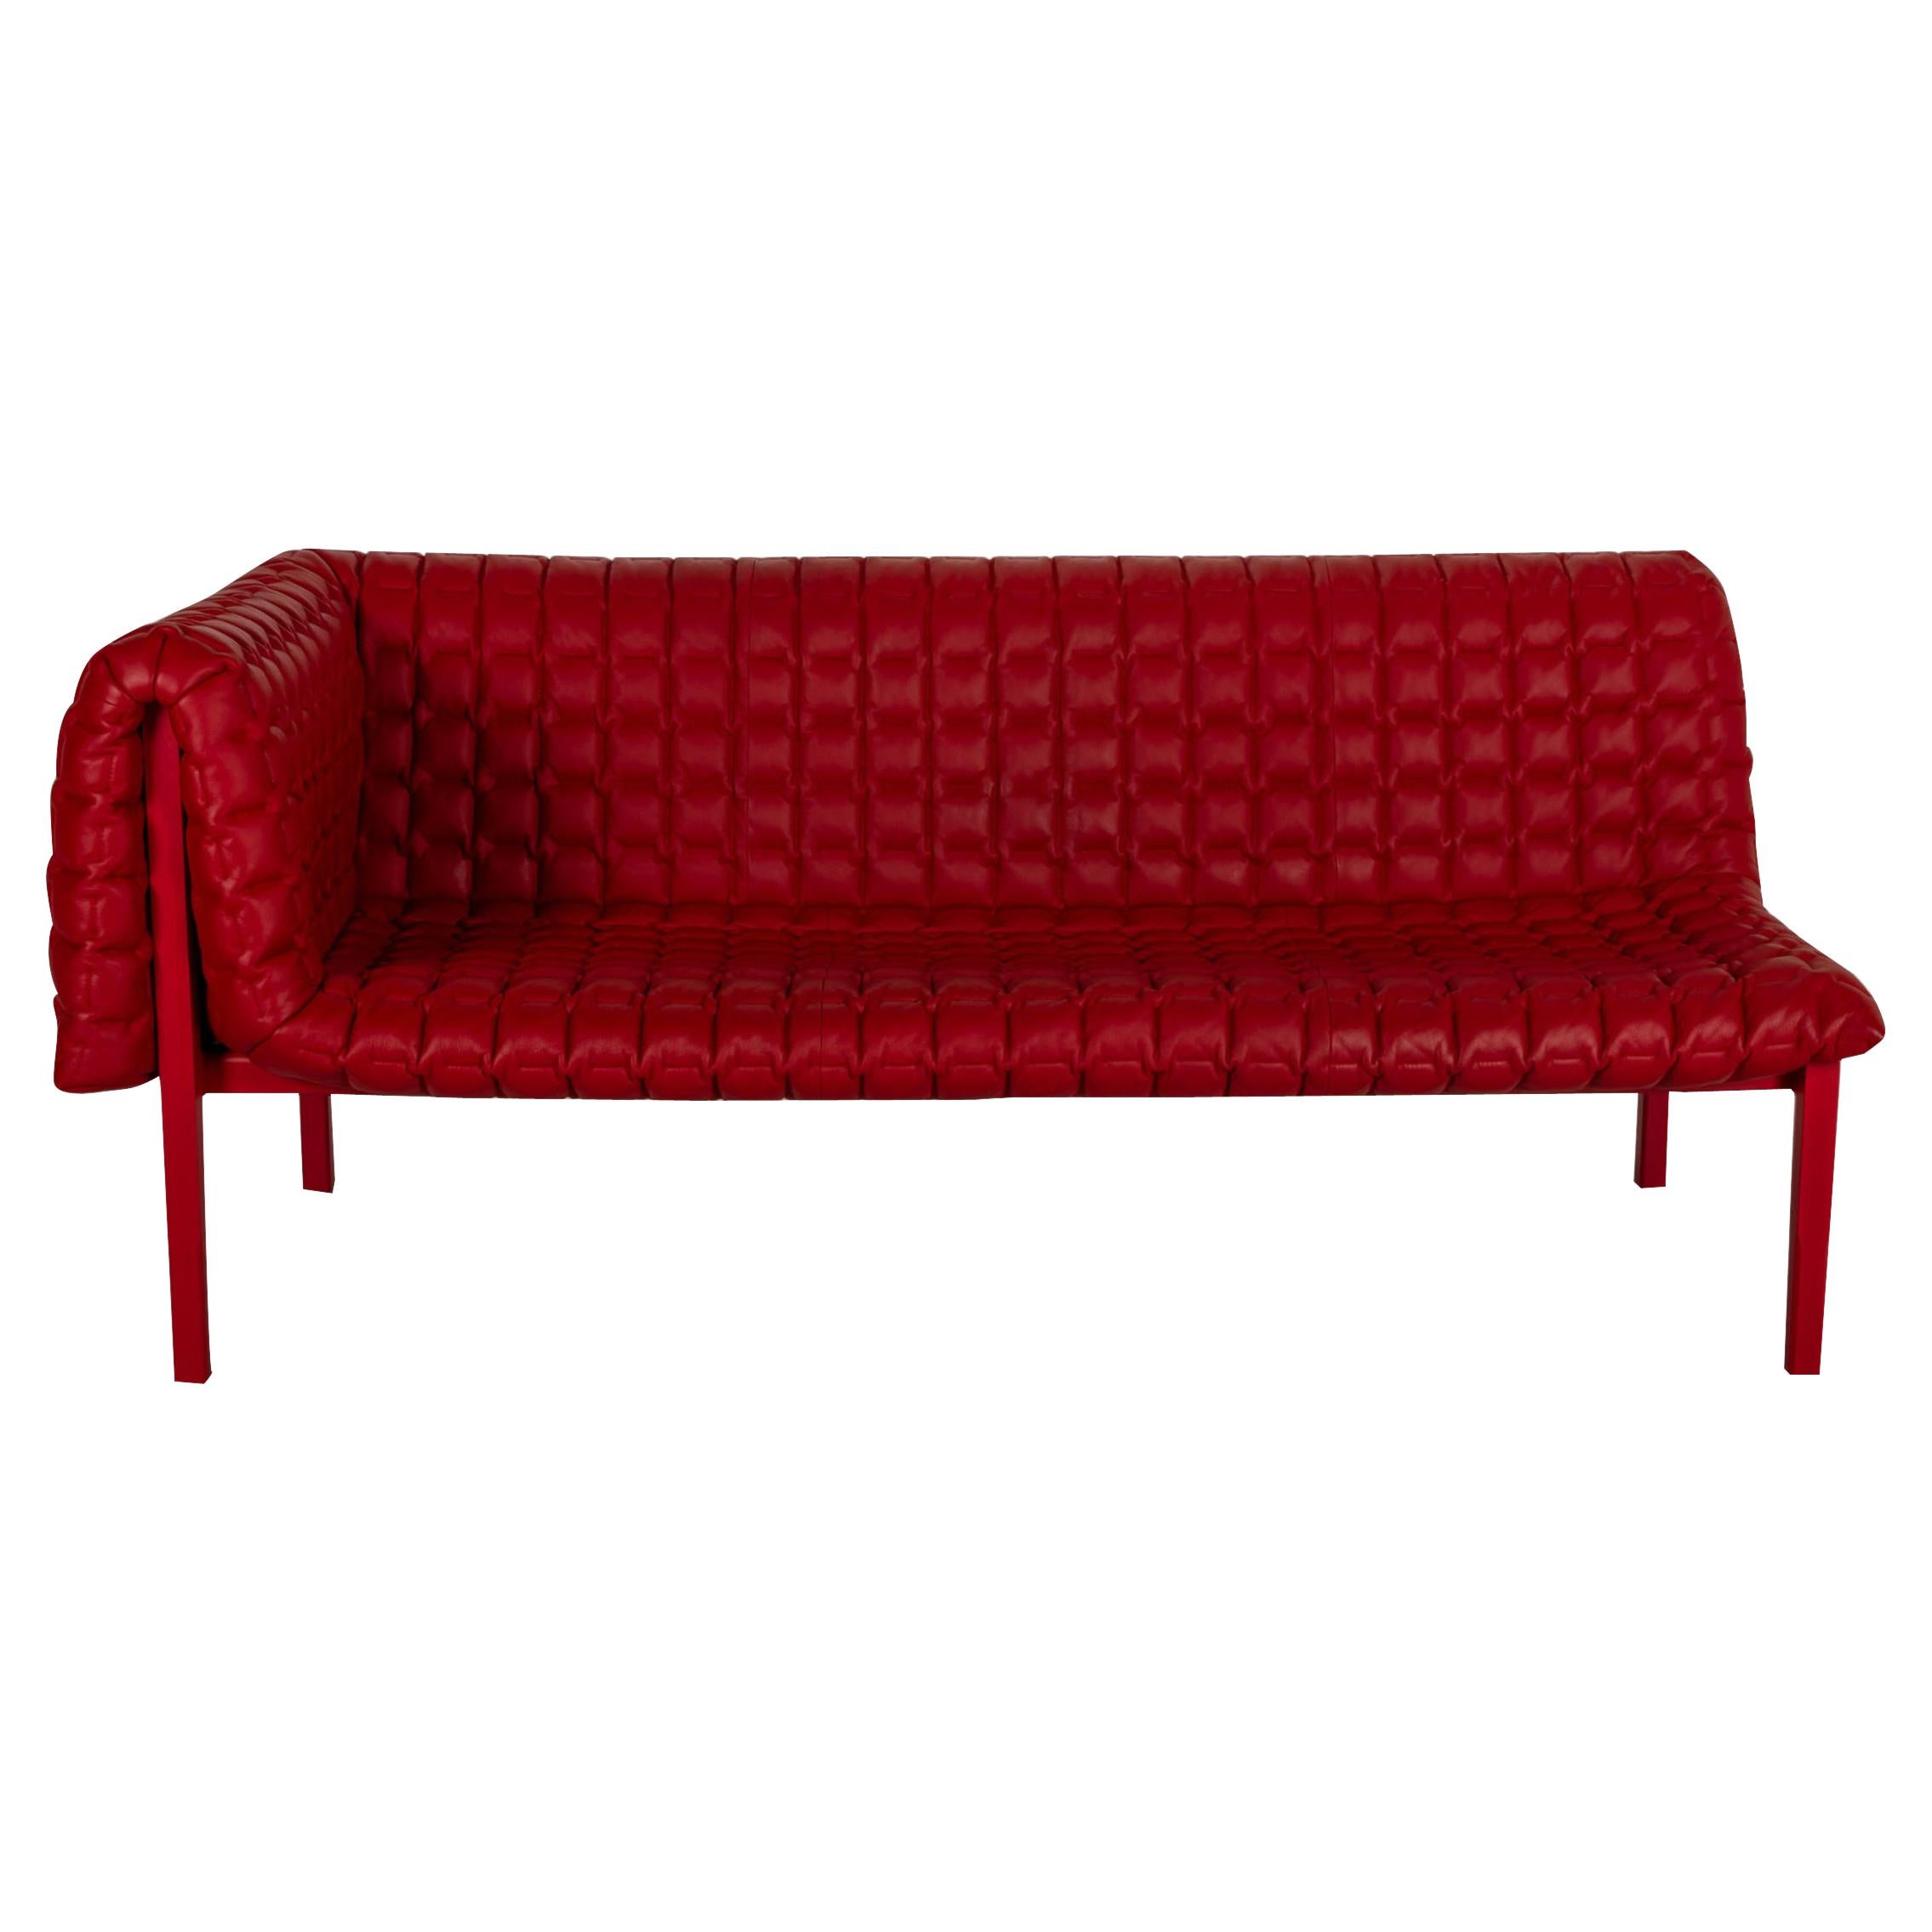 Ligne Roset Ruch Leder Lounger Rote Sofa Couch Meridienne Chaise Longue im Angebot